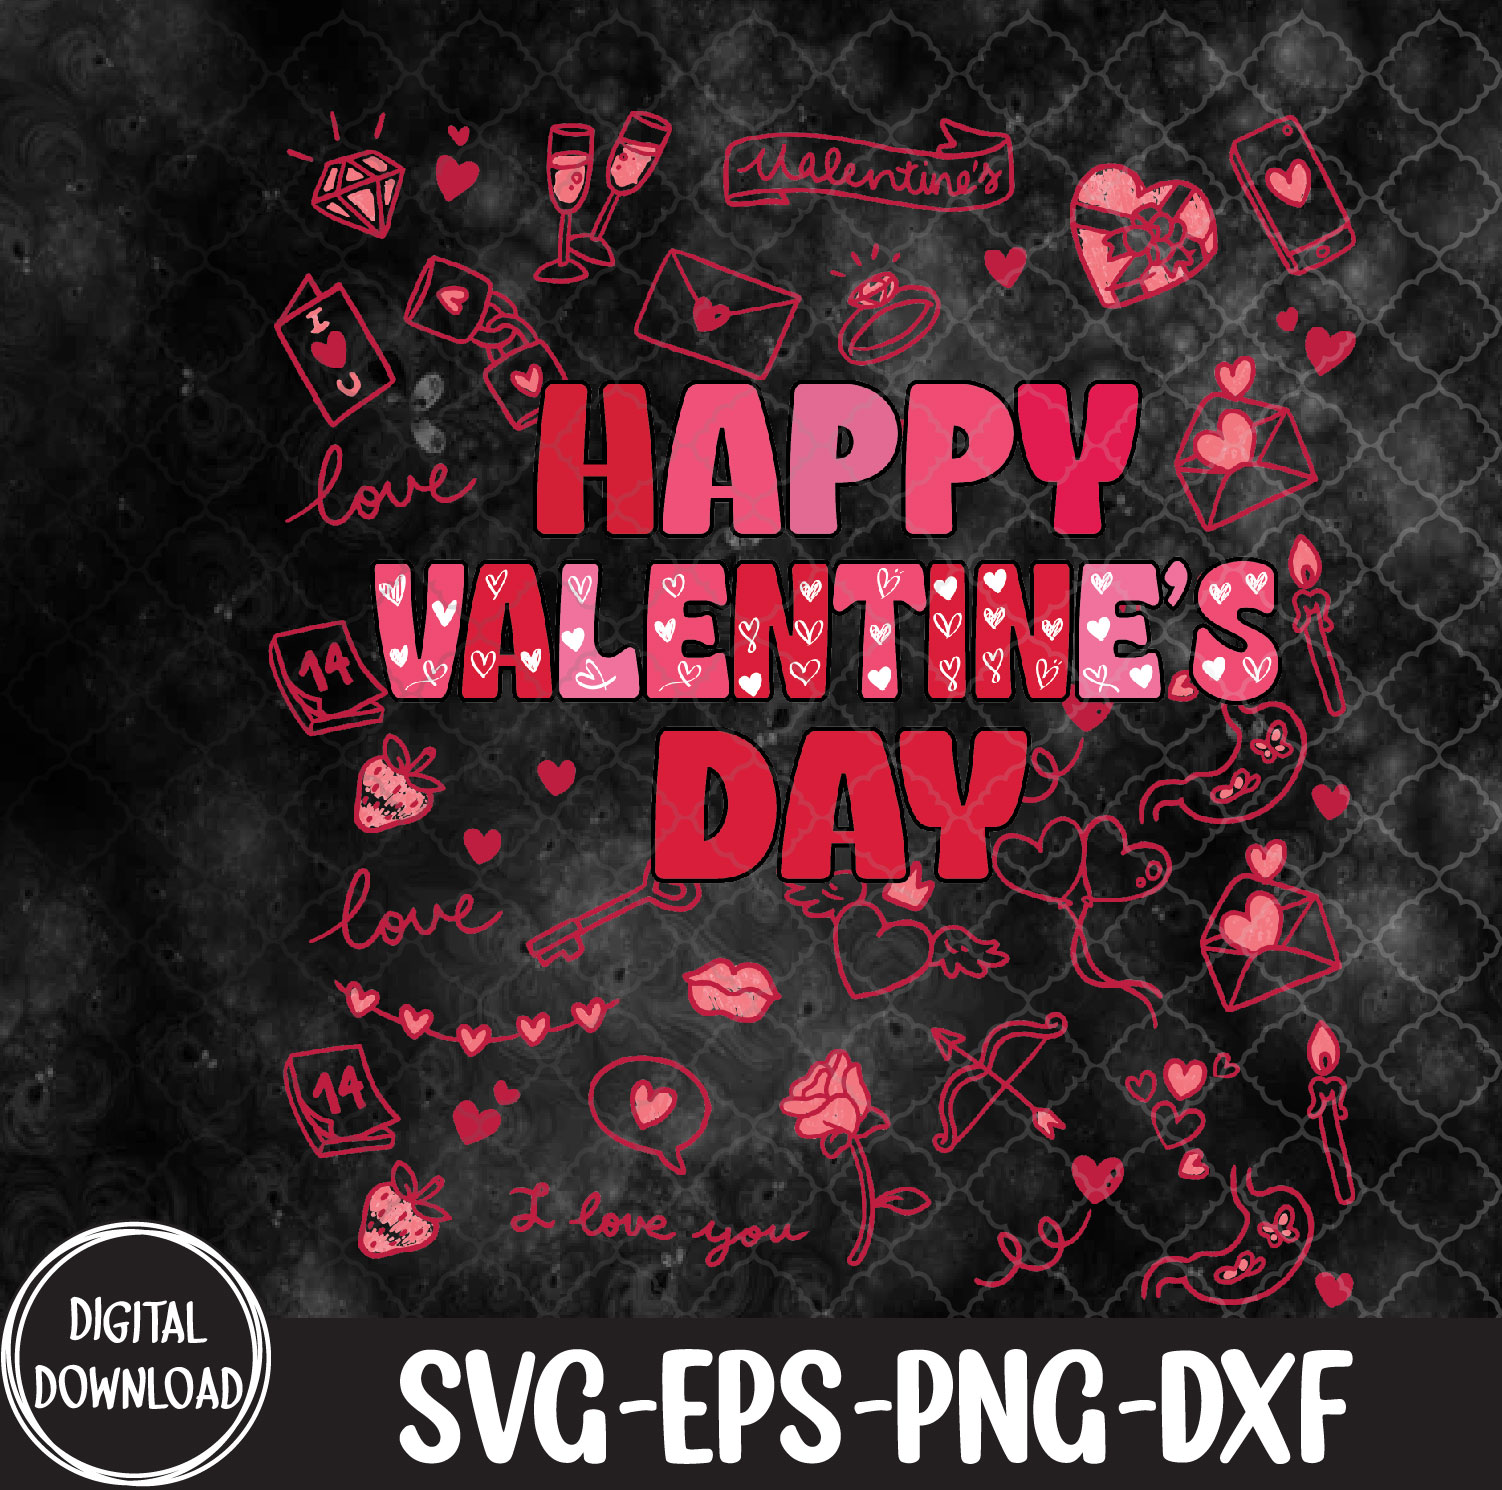 WTMNEW1512 09 26 Happy Valentines Day Couple Matching, Valentines Day svg, Svg, Eps, Png, dxf